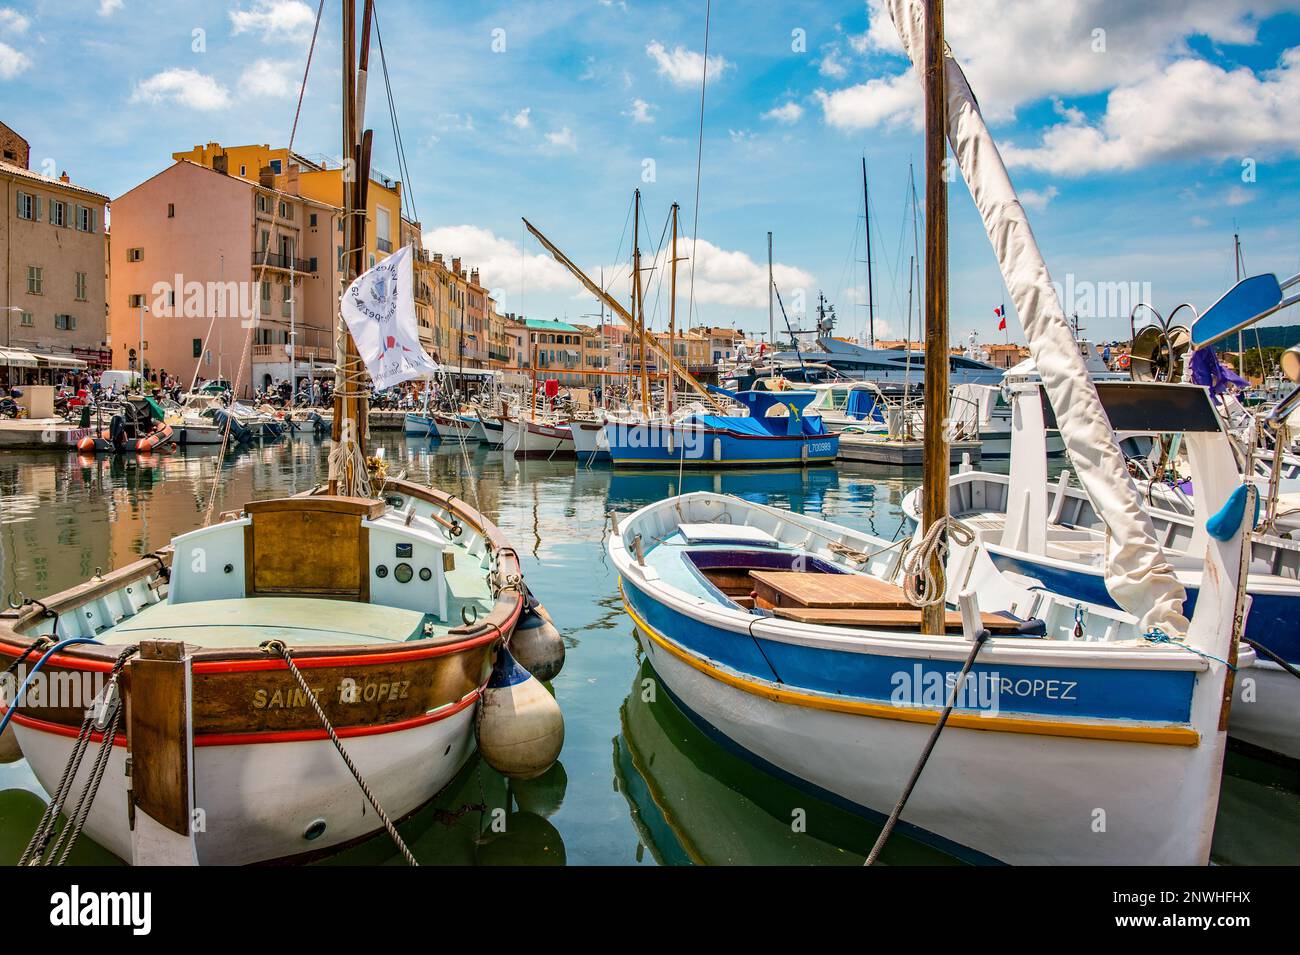 Small fishing boats in Saint-Tropez Harbour Stock Photo